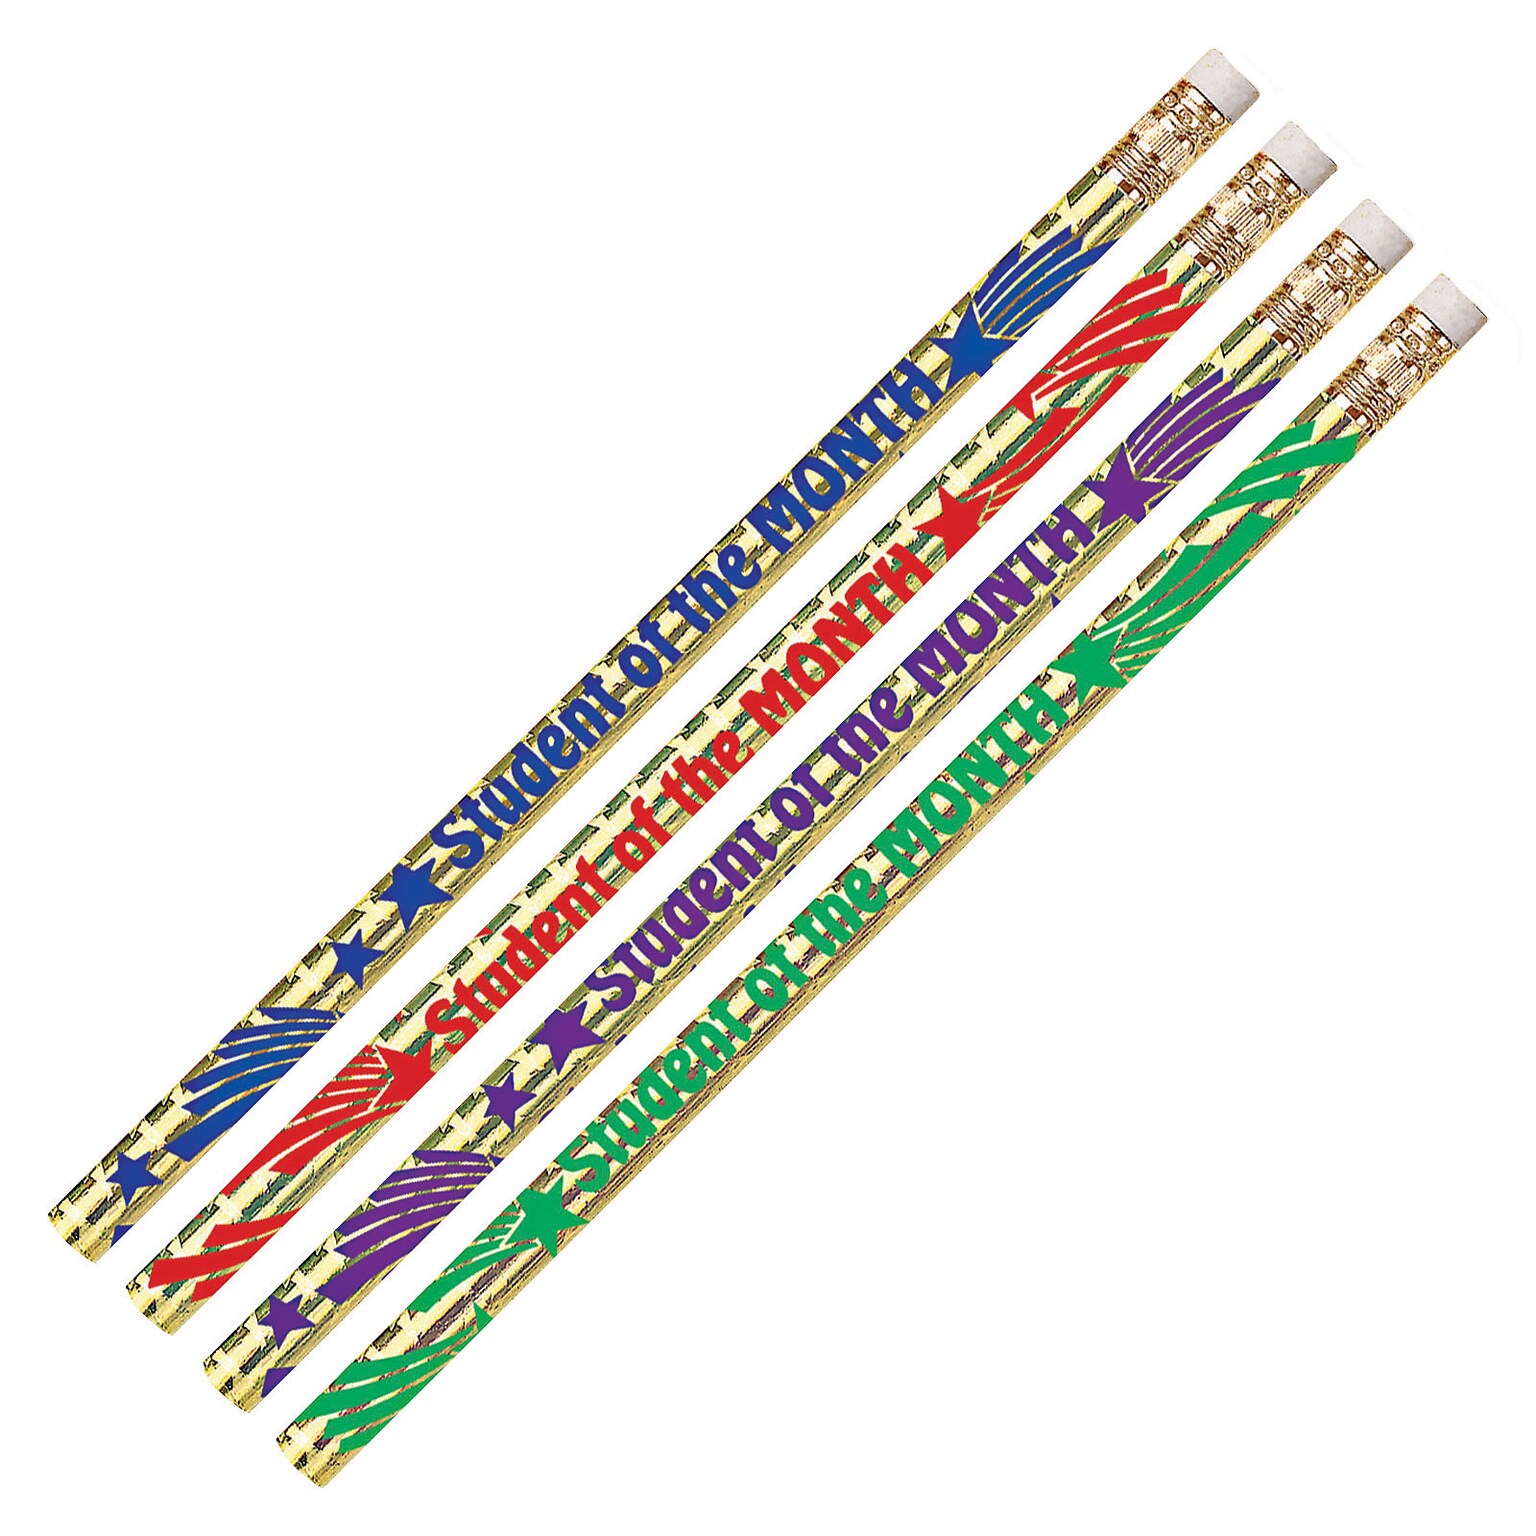 Musgrave Pencil Company Student of the Month Motivational Pencils, #2 Lead, 12/Pack, 12 Packs (MUS2284D-12)